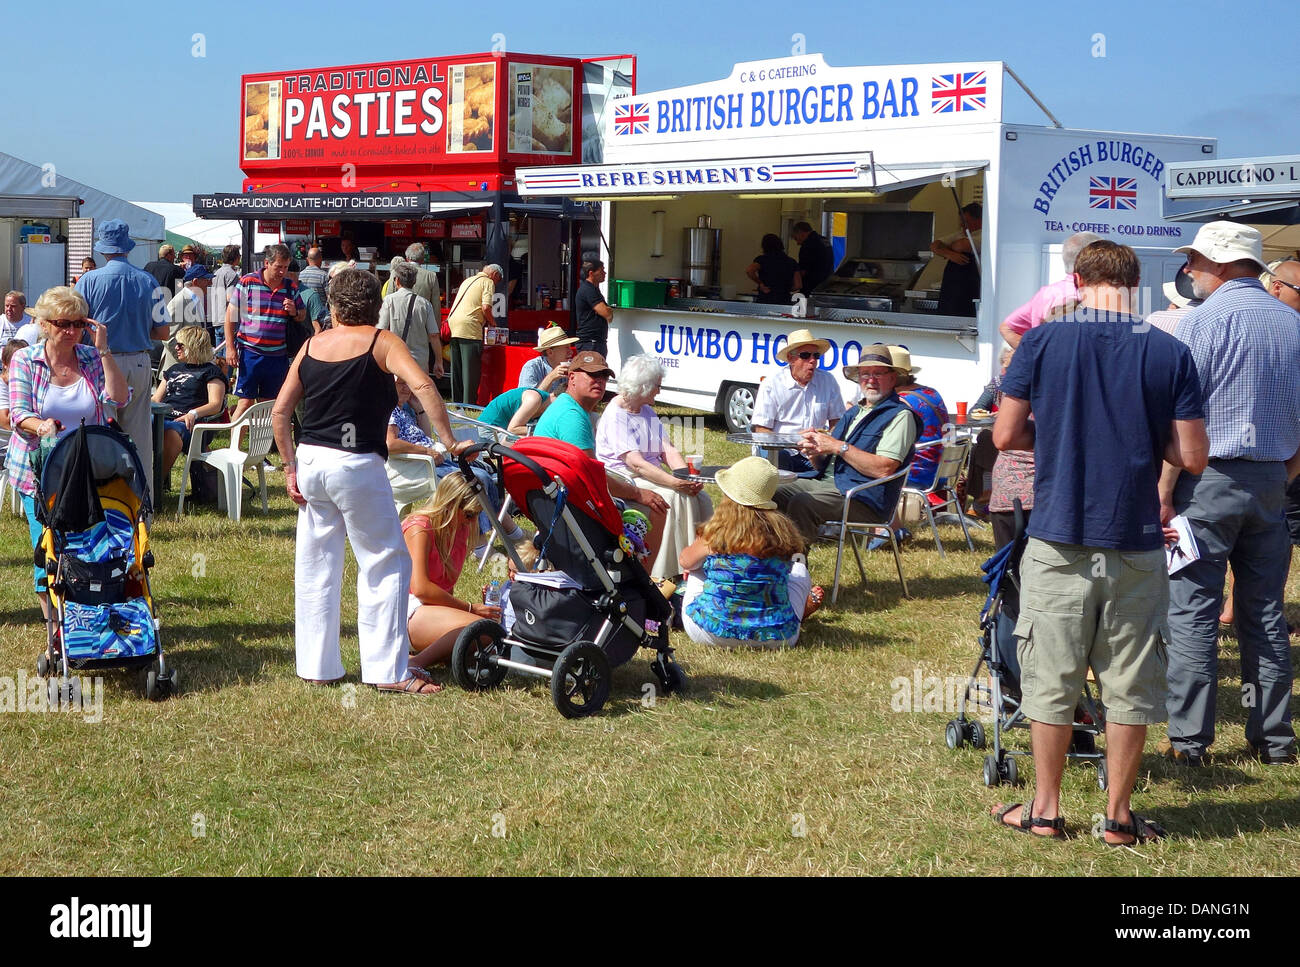 Visitors to Stithians show in Cornwall enjoying the various refreshments on offer Stock Photo